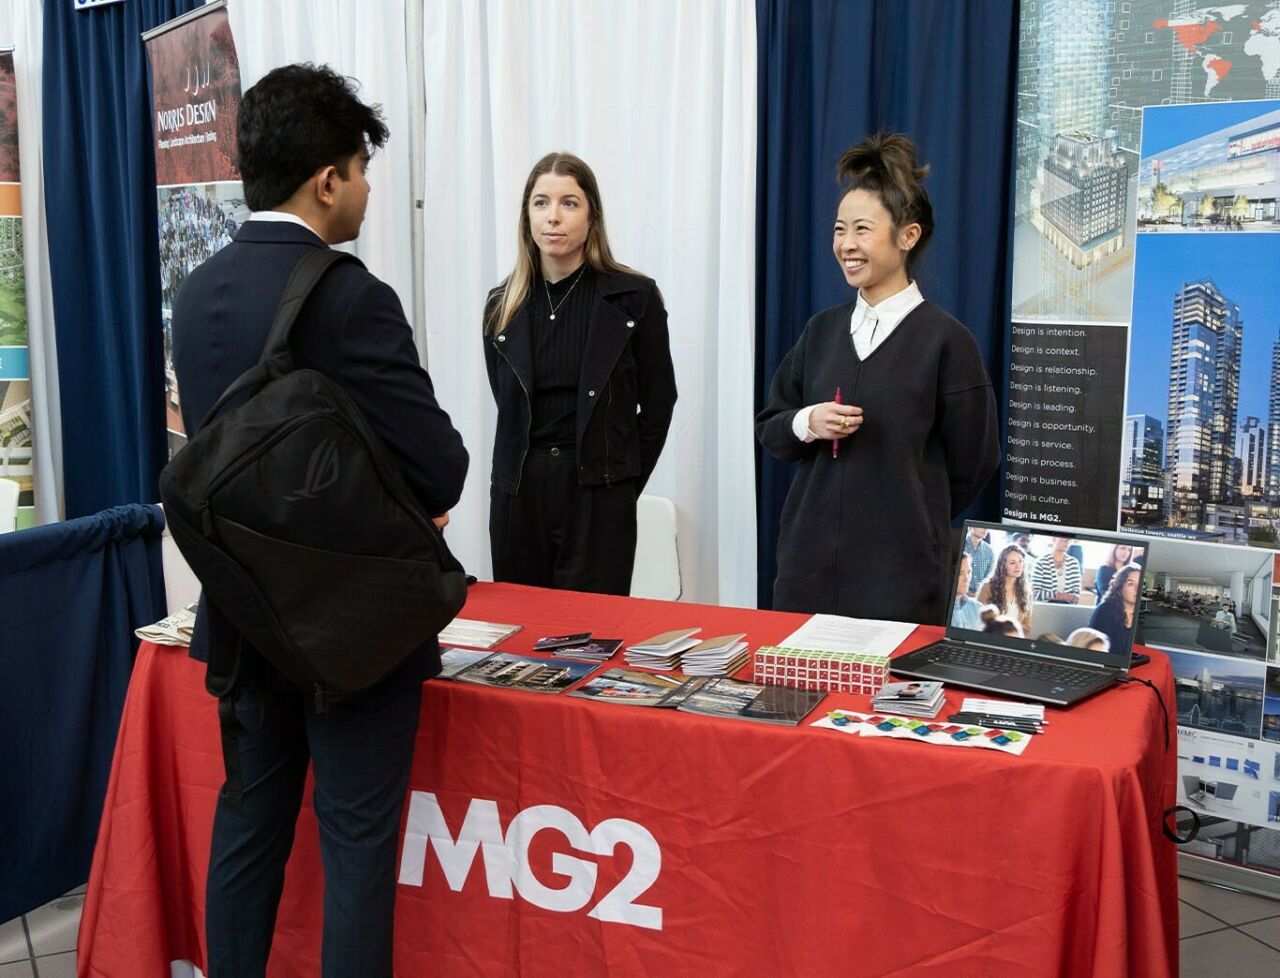 Two women stand behind a table with a red MG2 tablecloth on it while talking to a male student in front of them.